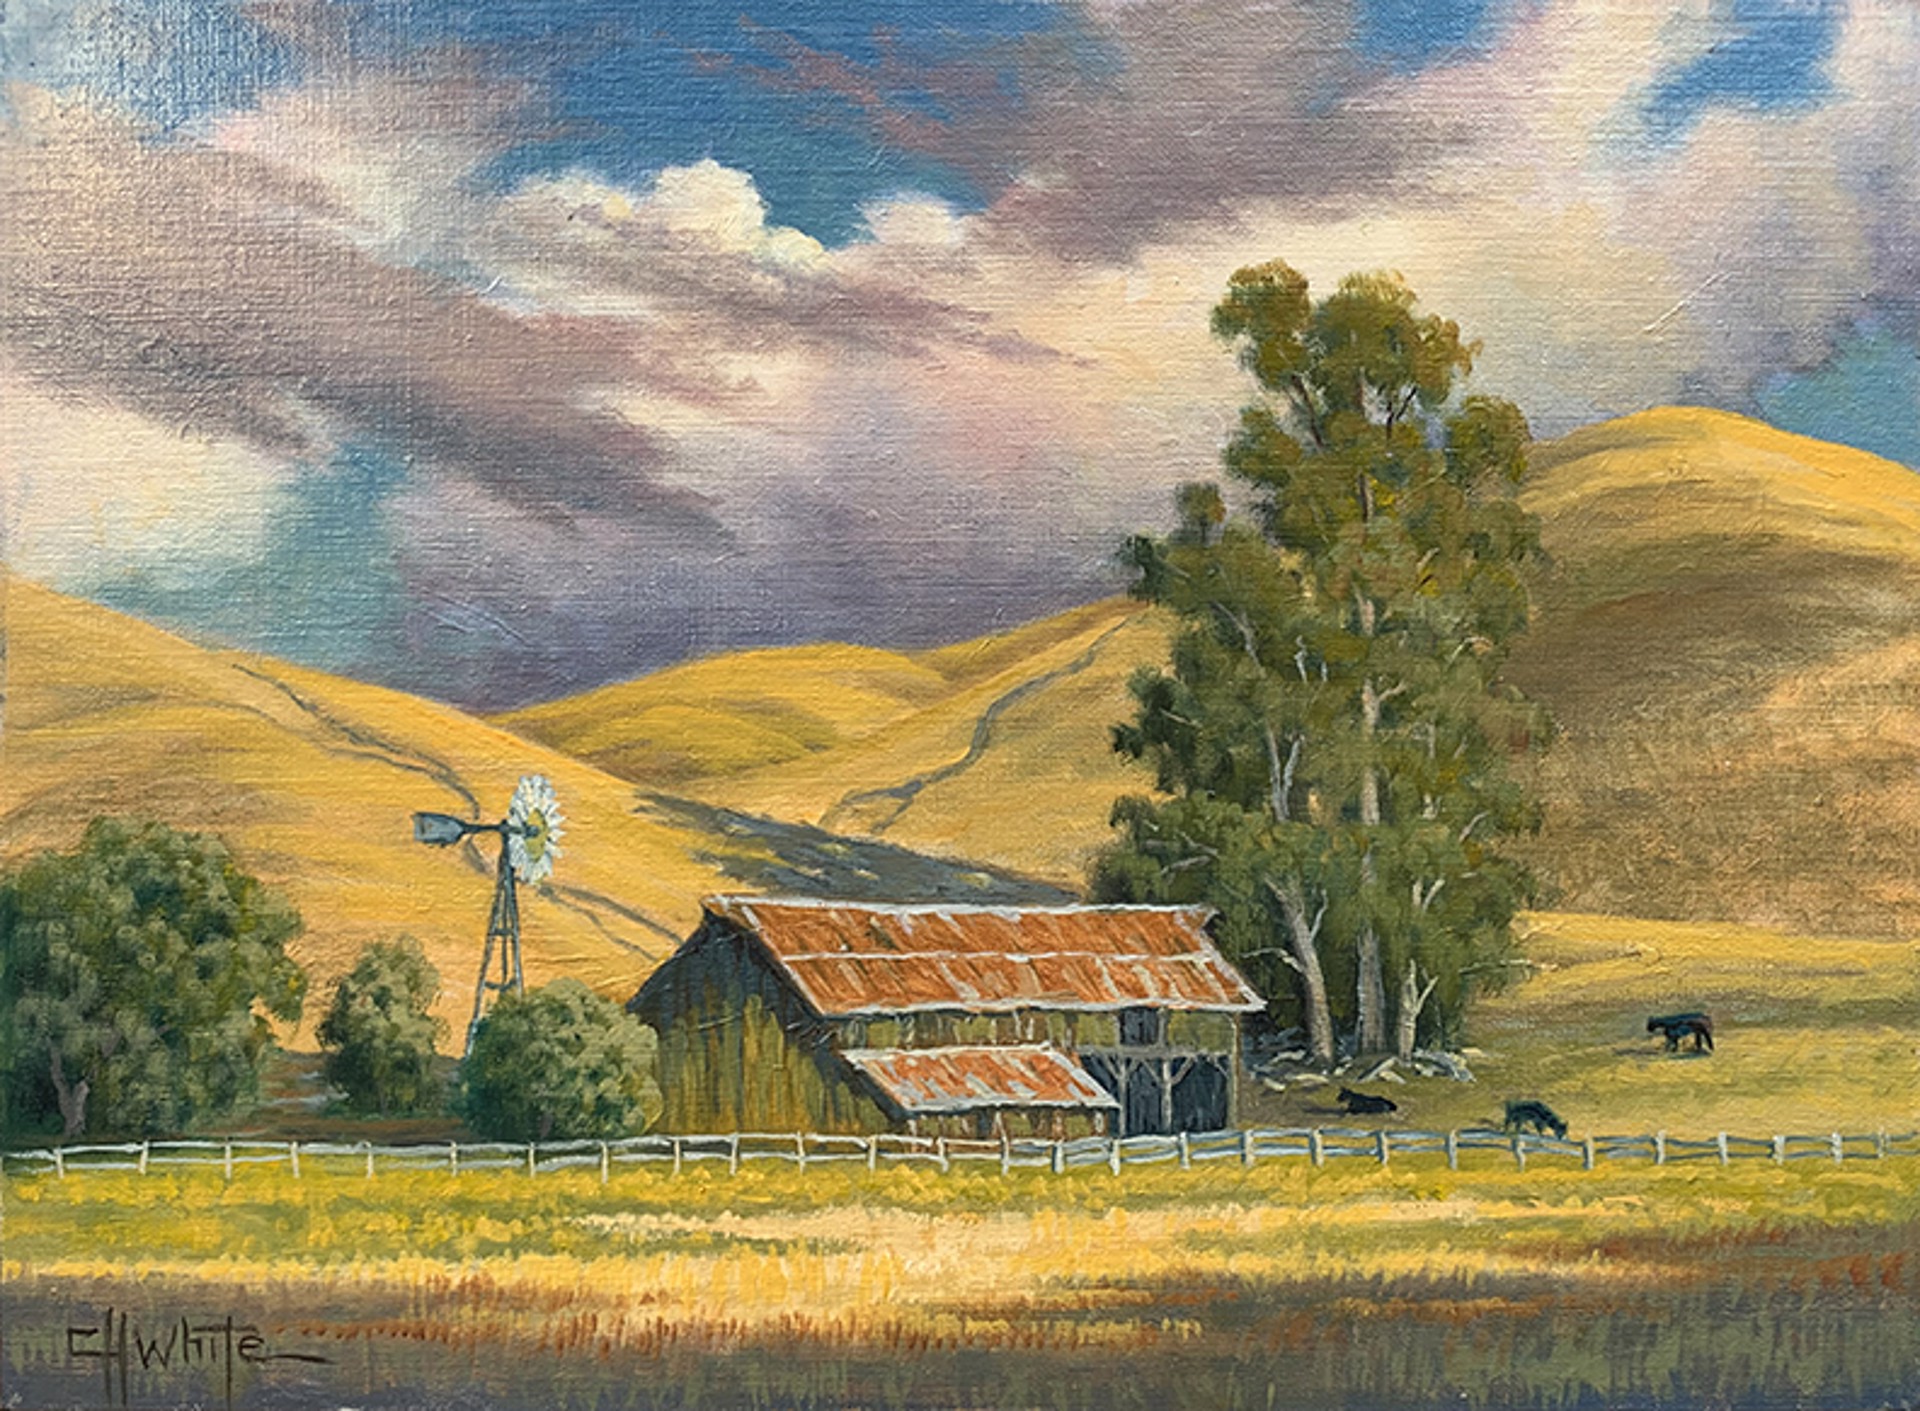 Late Afternoon, Jensen Road by Charles White